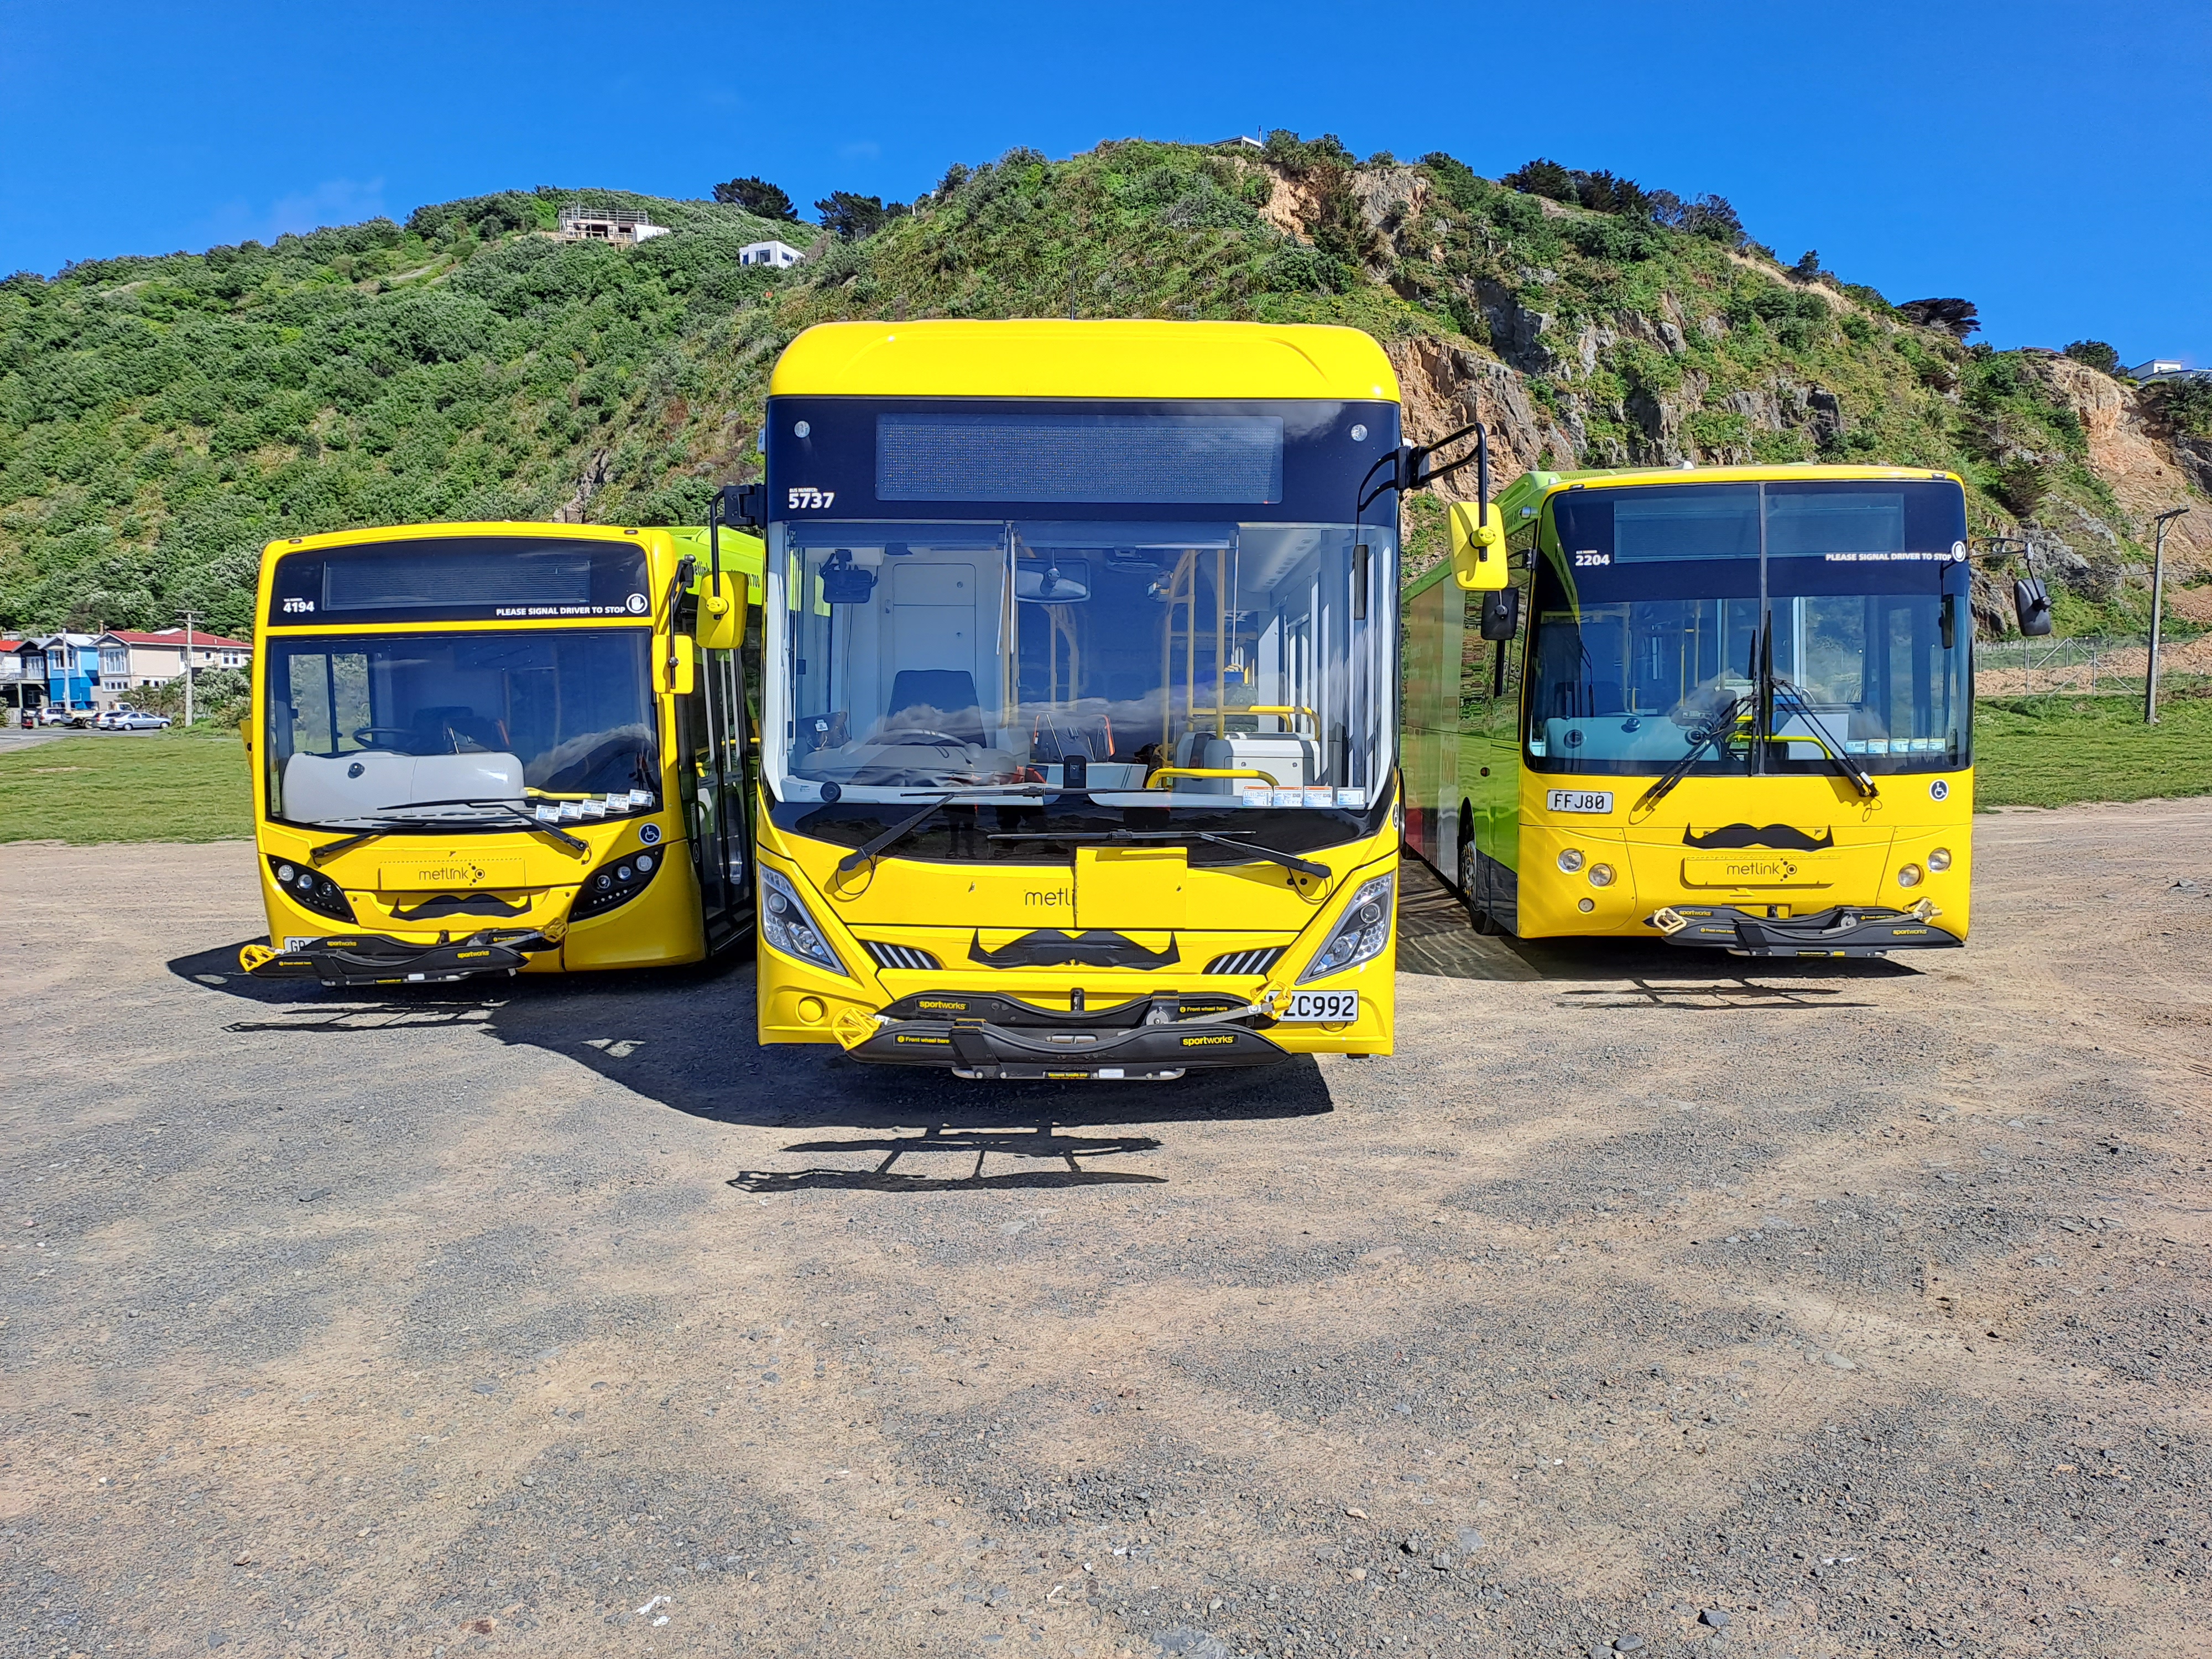 Three Metlink buses with moustaches on their front